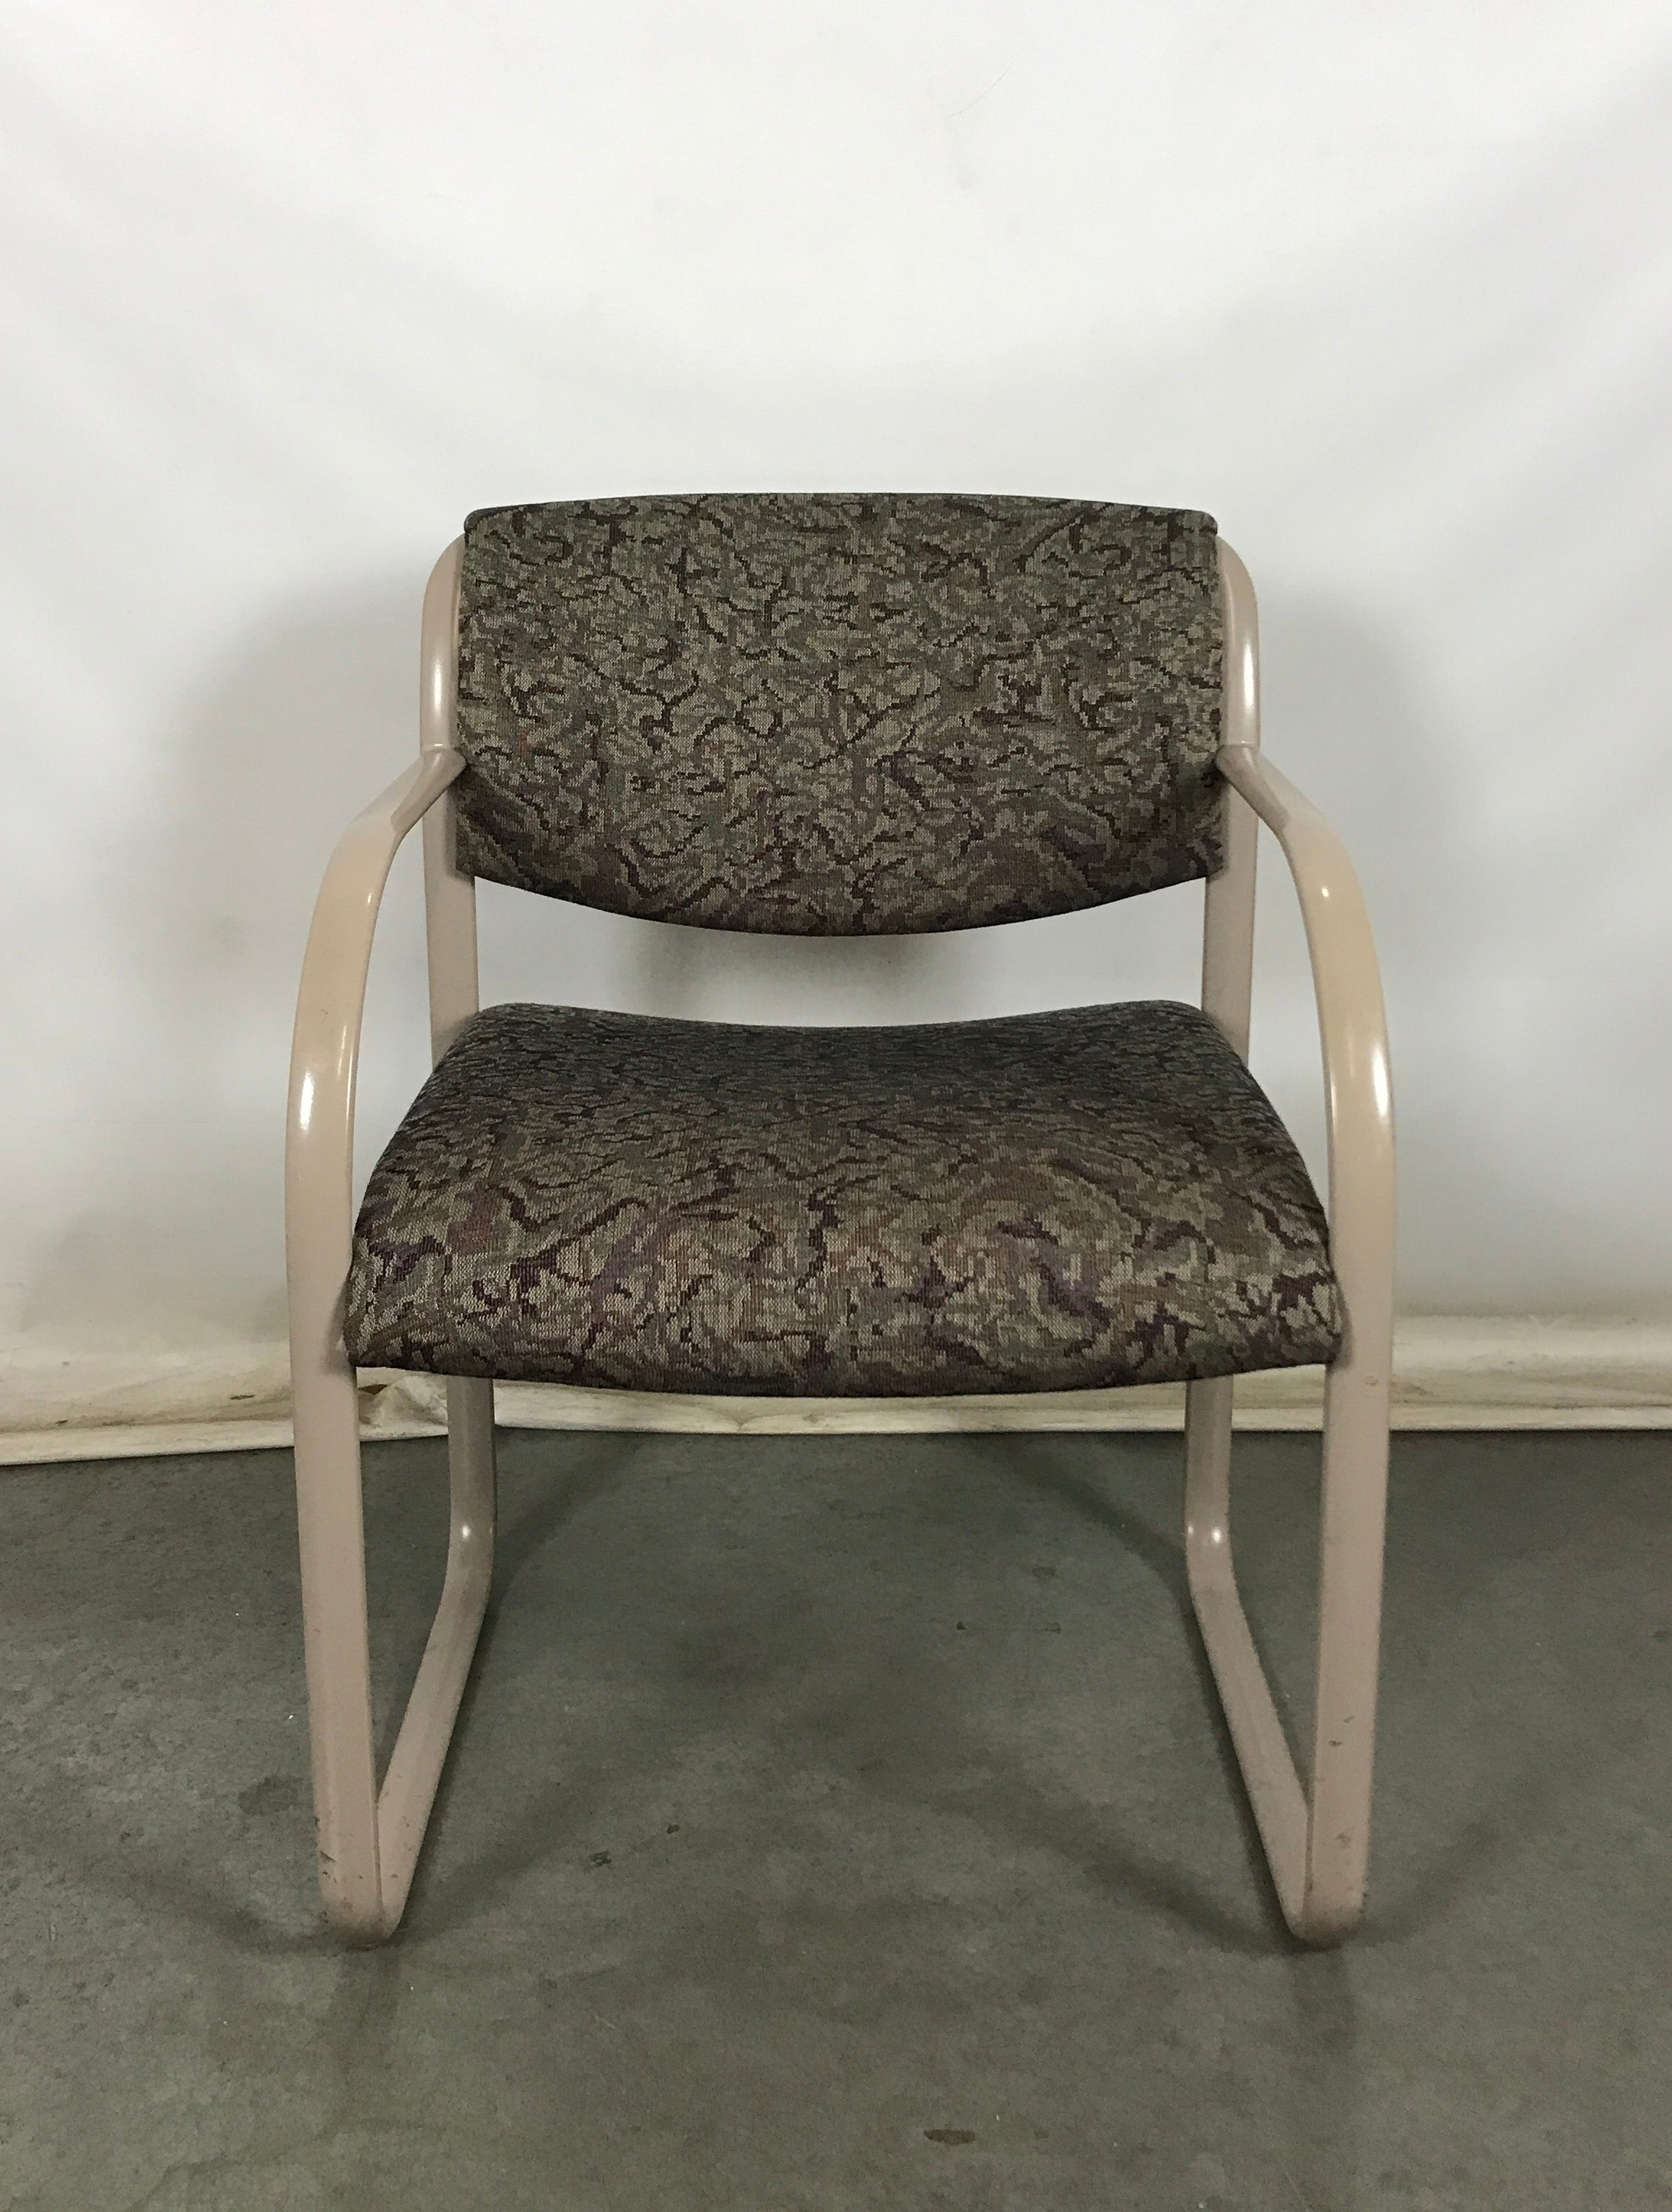 Patterned Upholstered Armchair